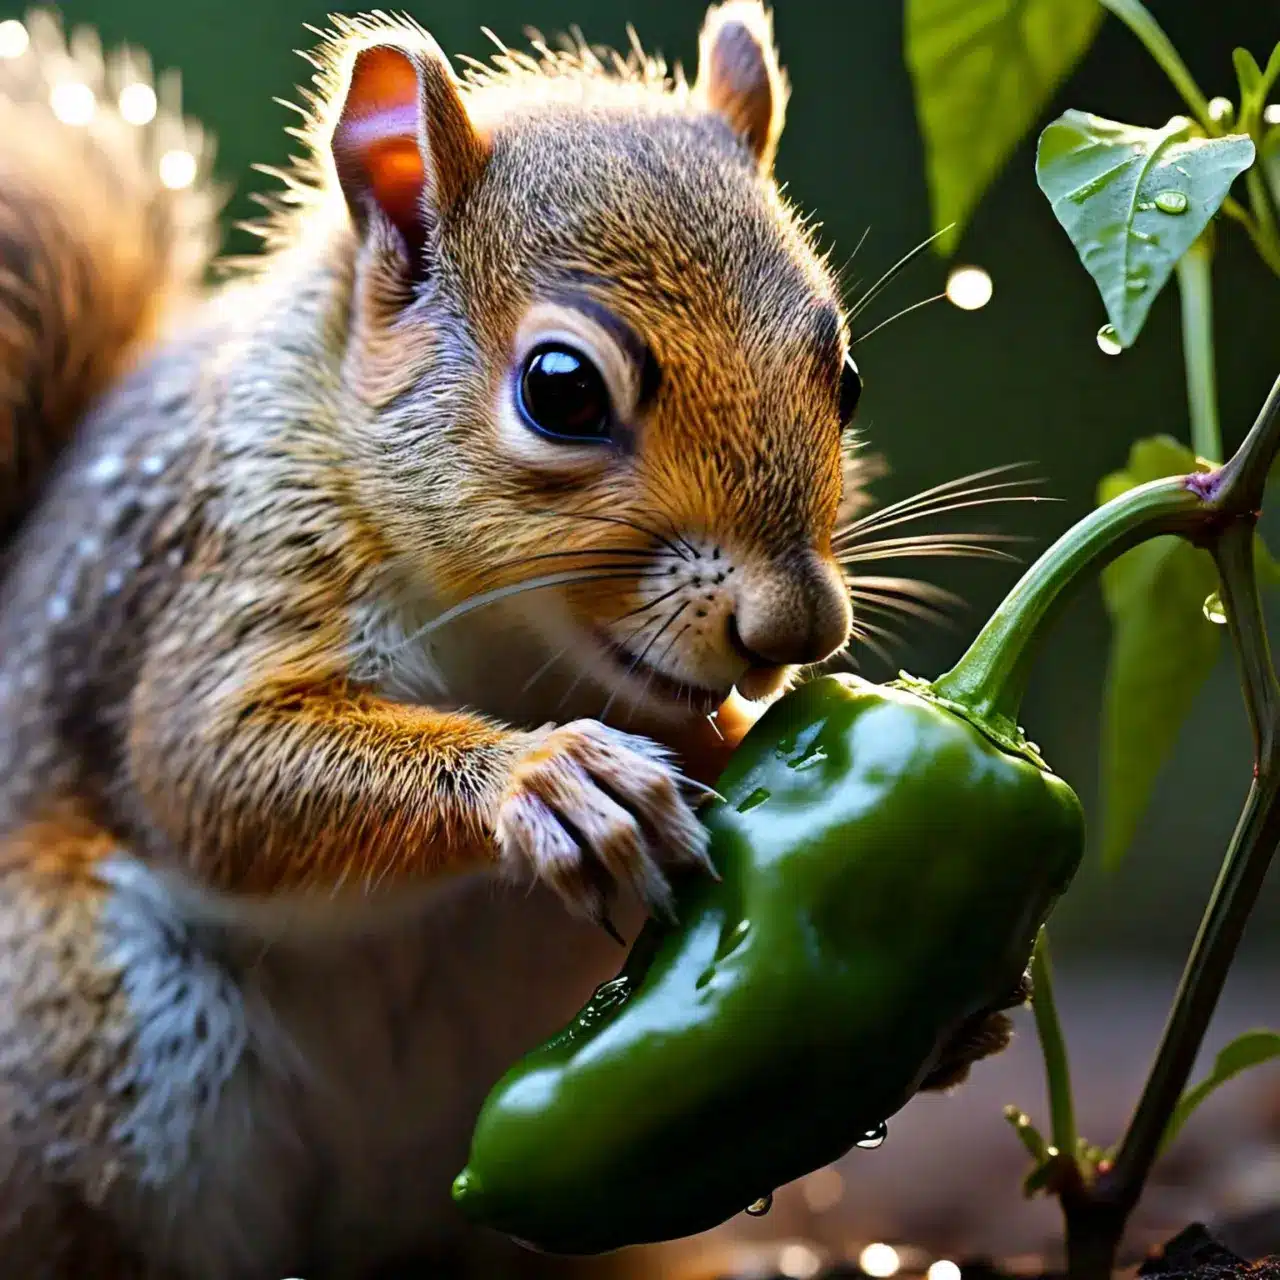 Eastern gray squirrel nibbling on a green jalapeno pepper